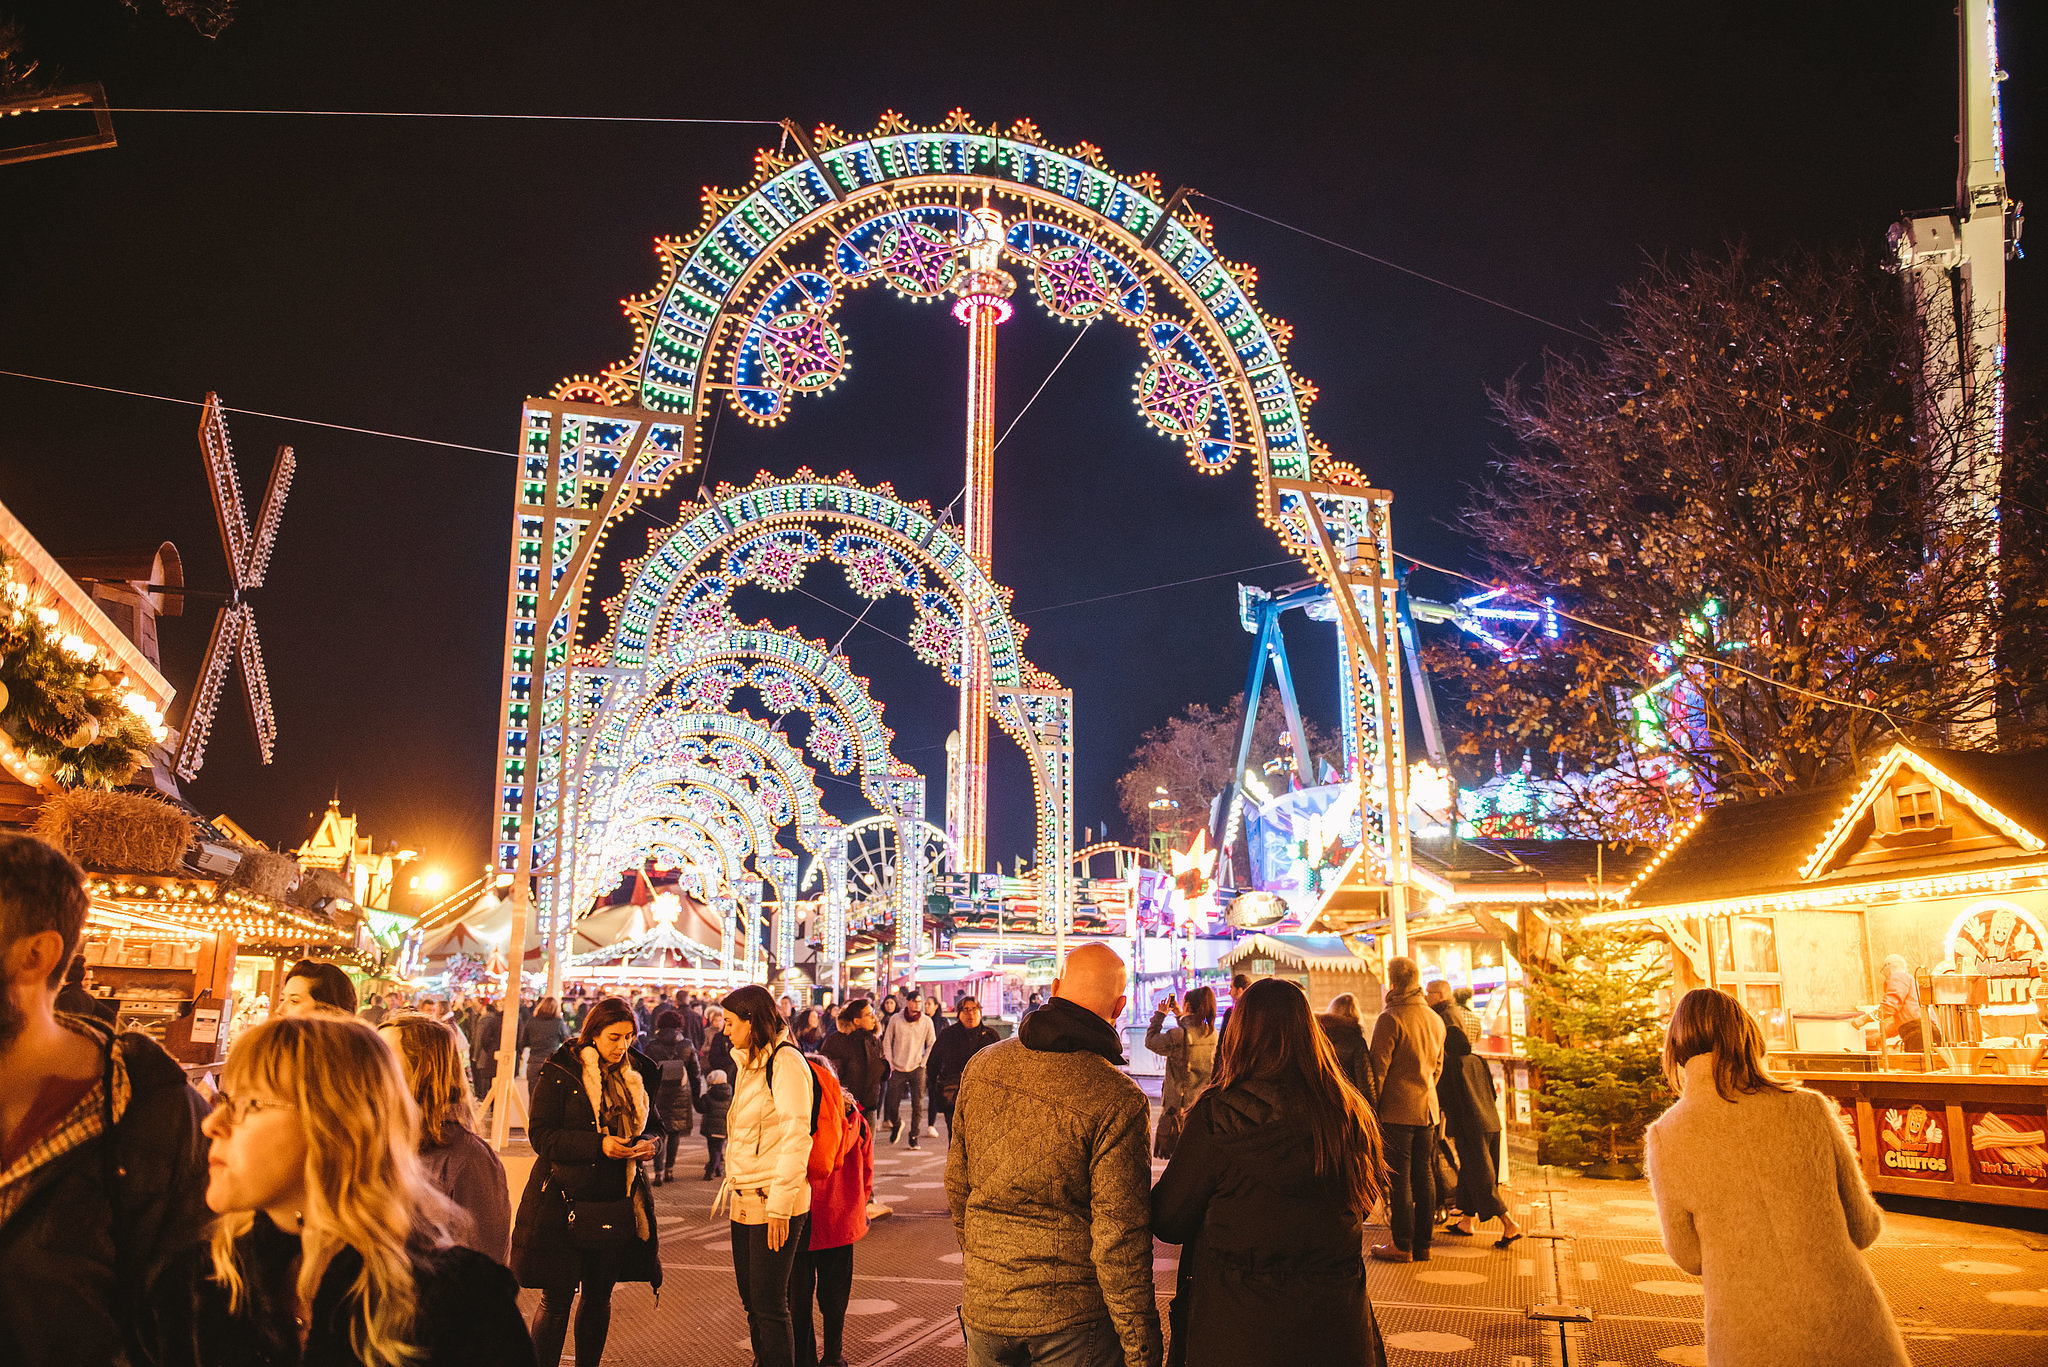 Winter Wonderland London 2022: info and tickets for the Christmas attraction